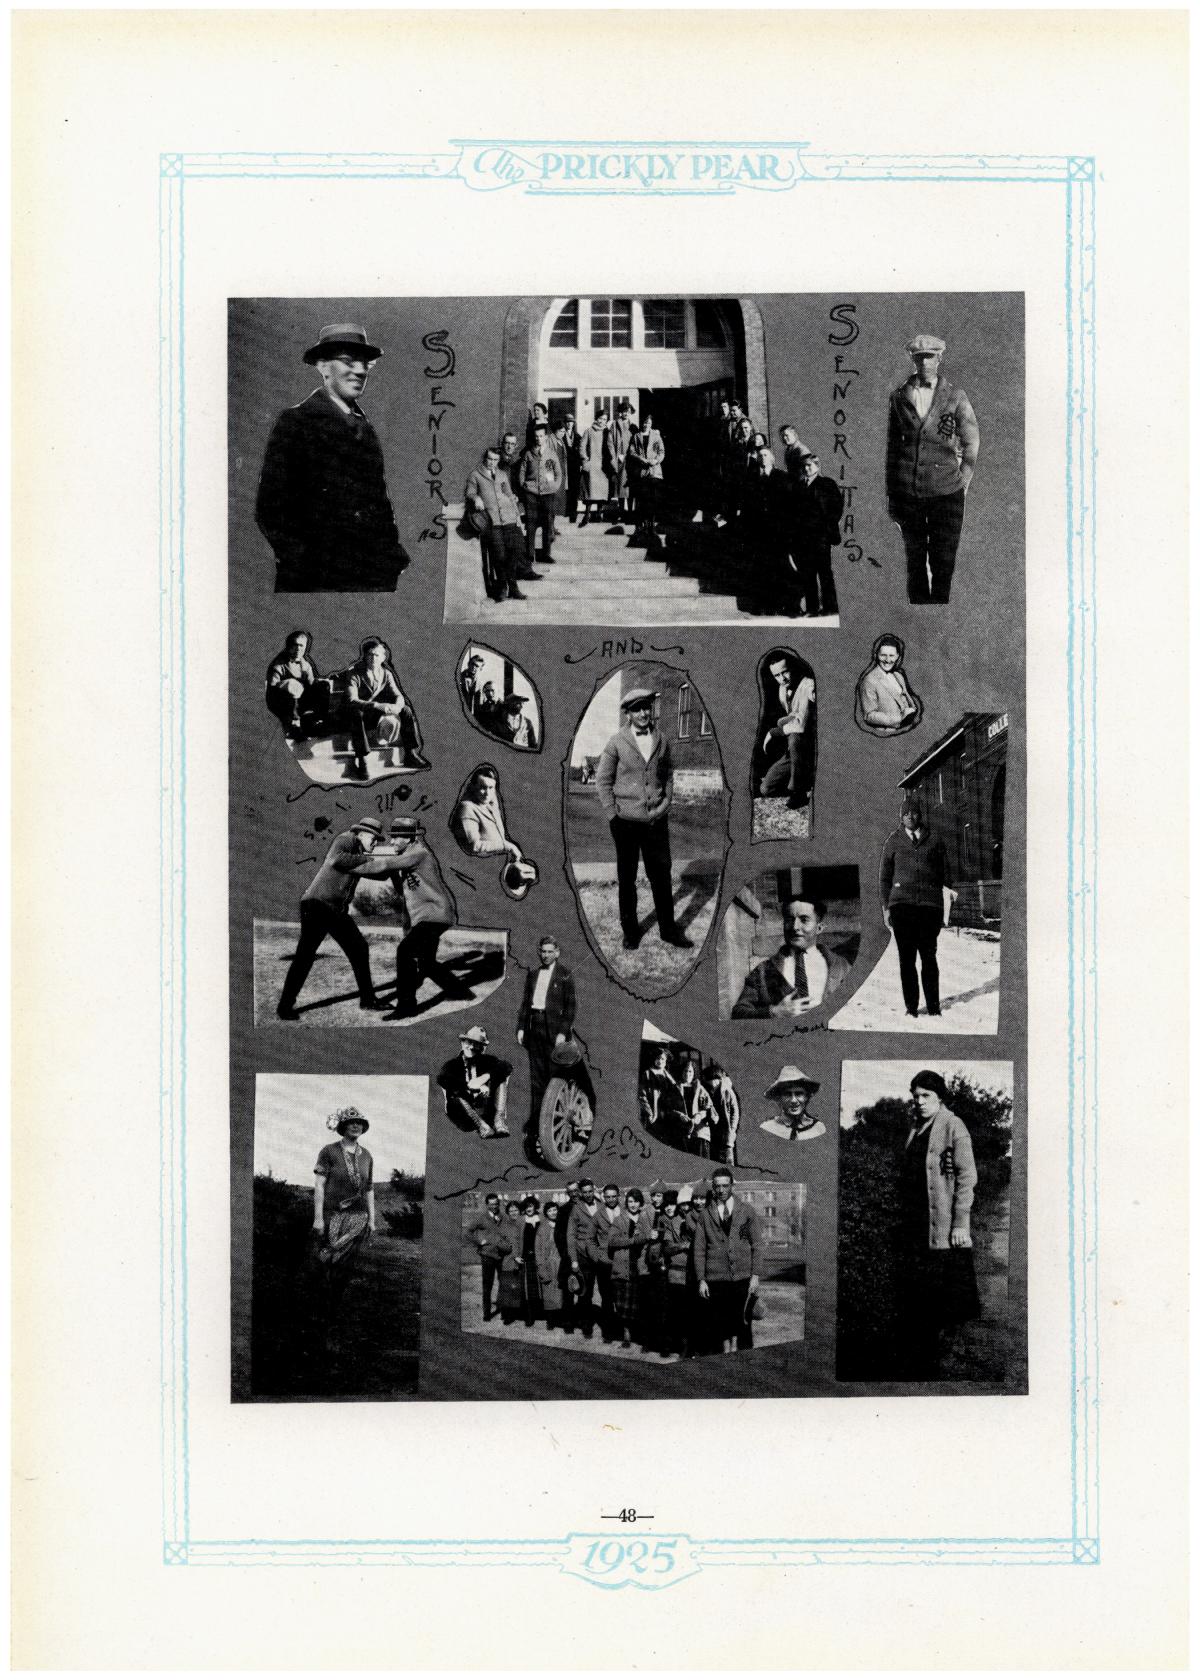 Prickly Pear, Yearbook of Abilene Christian College, 1925
                                                
                                                    48
                                                